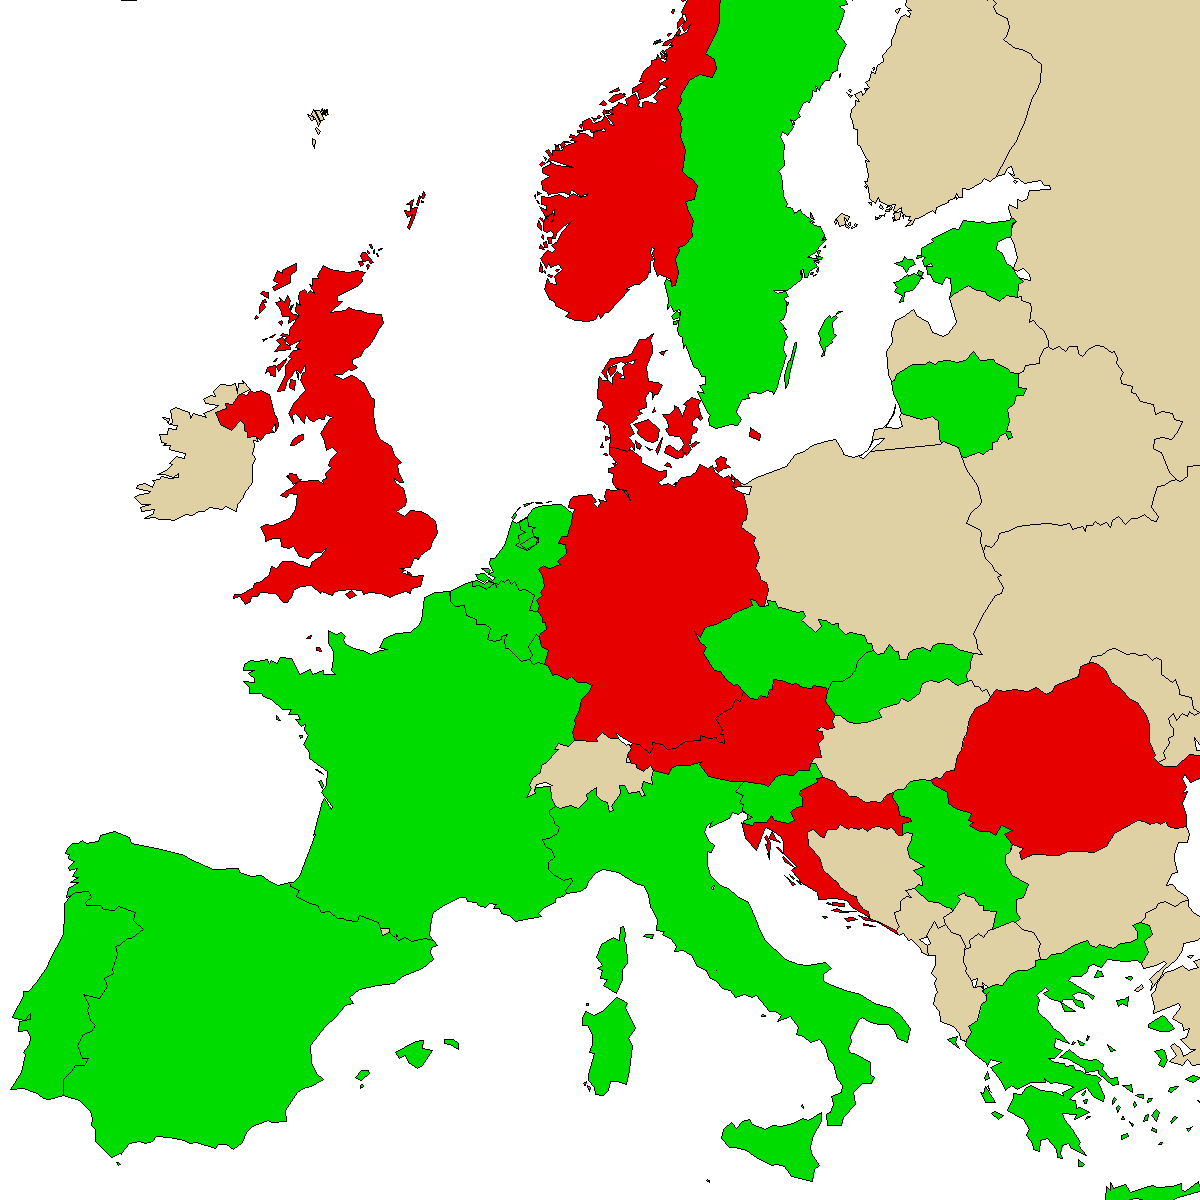 legal info map for our product 3MMA, green are countries with no ban, red with ban, grey is unknown